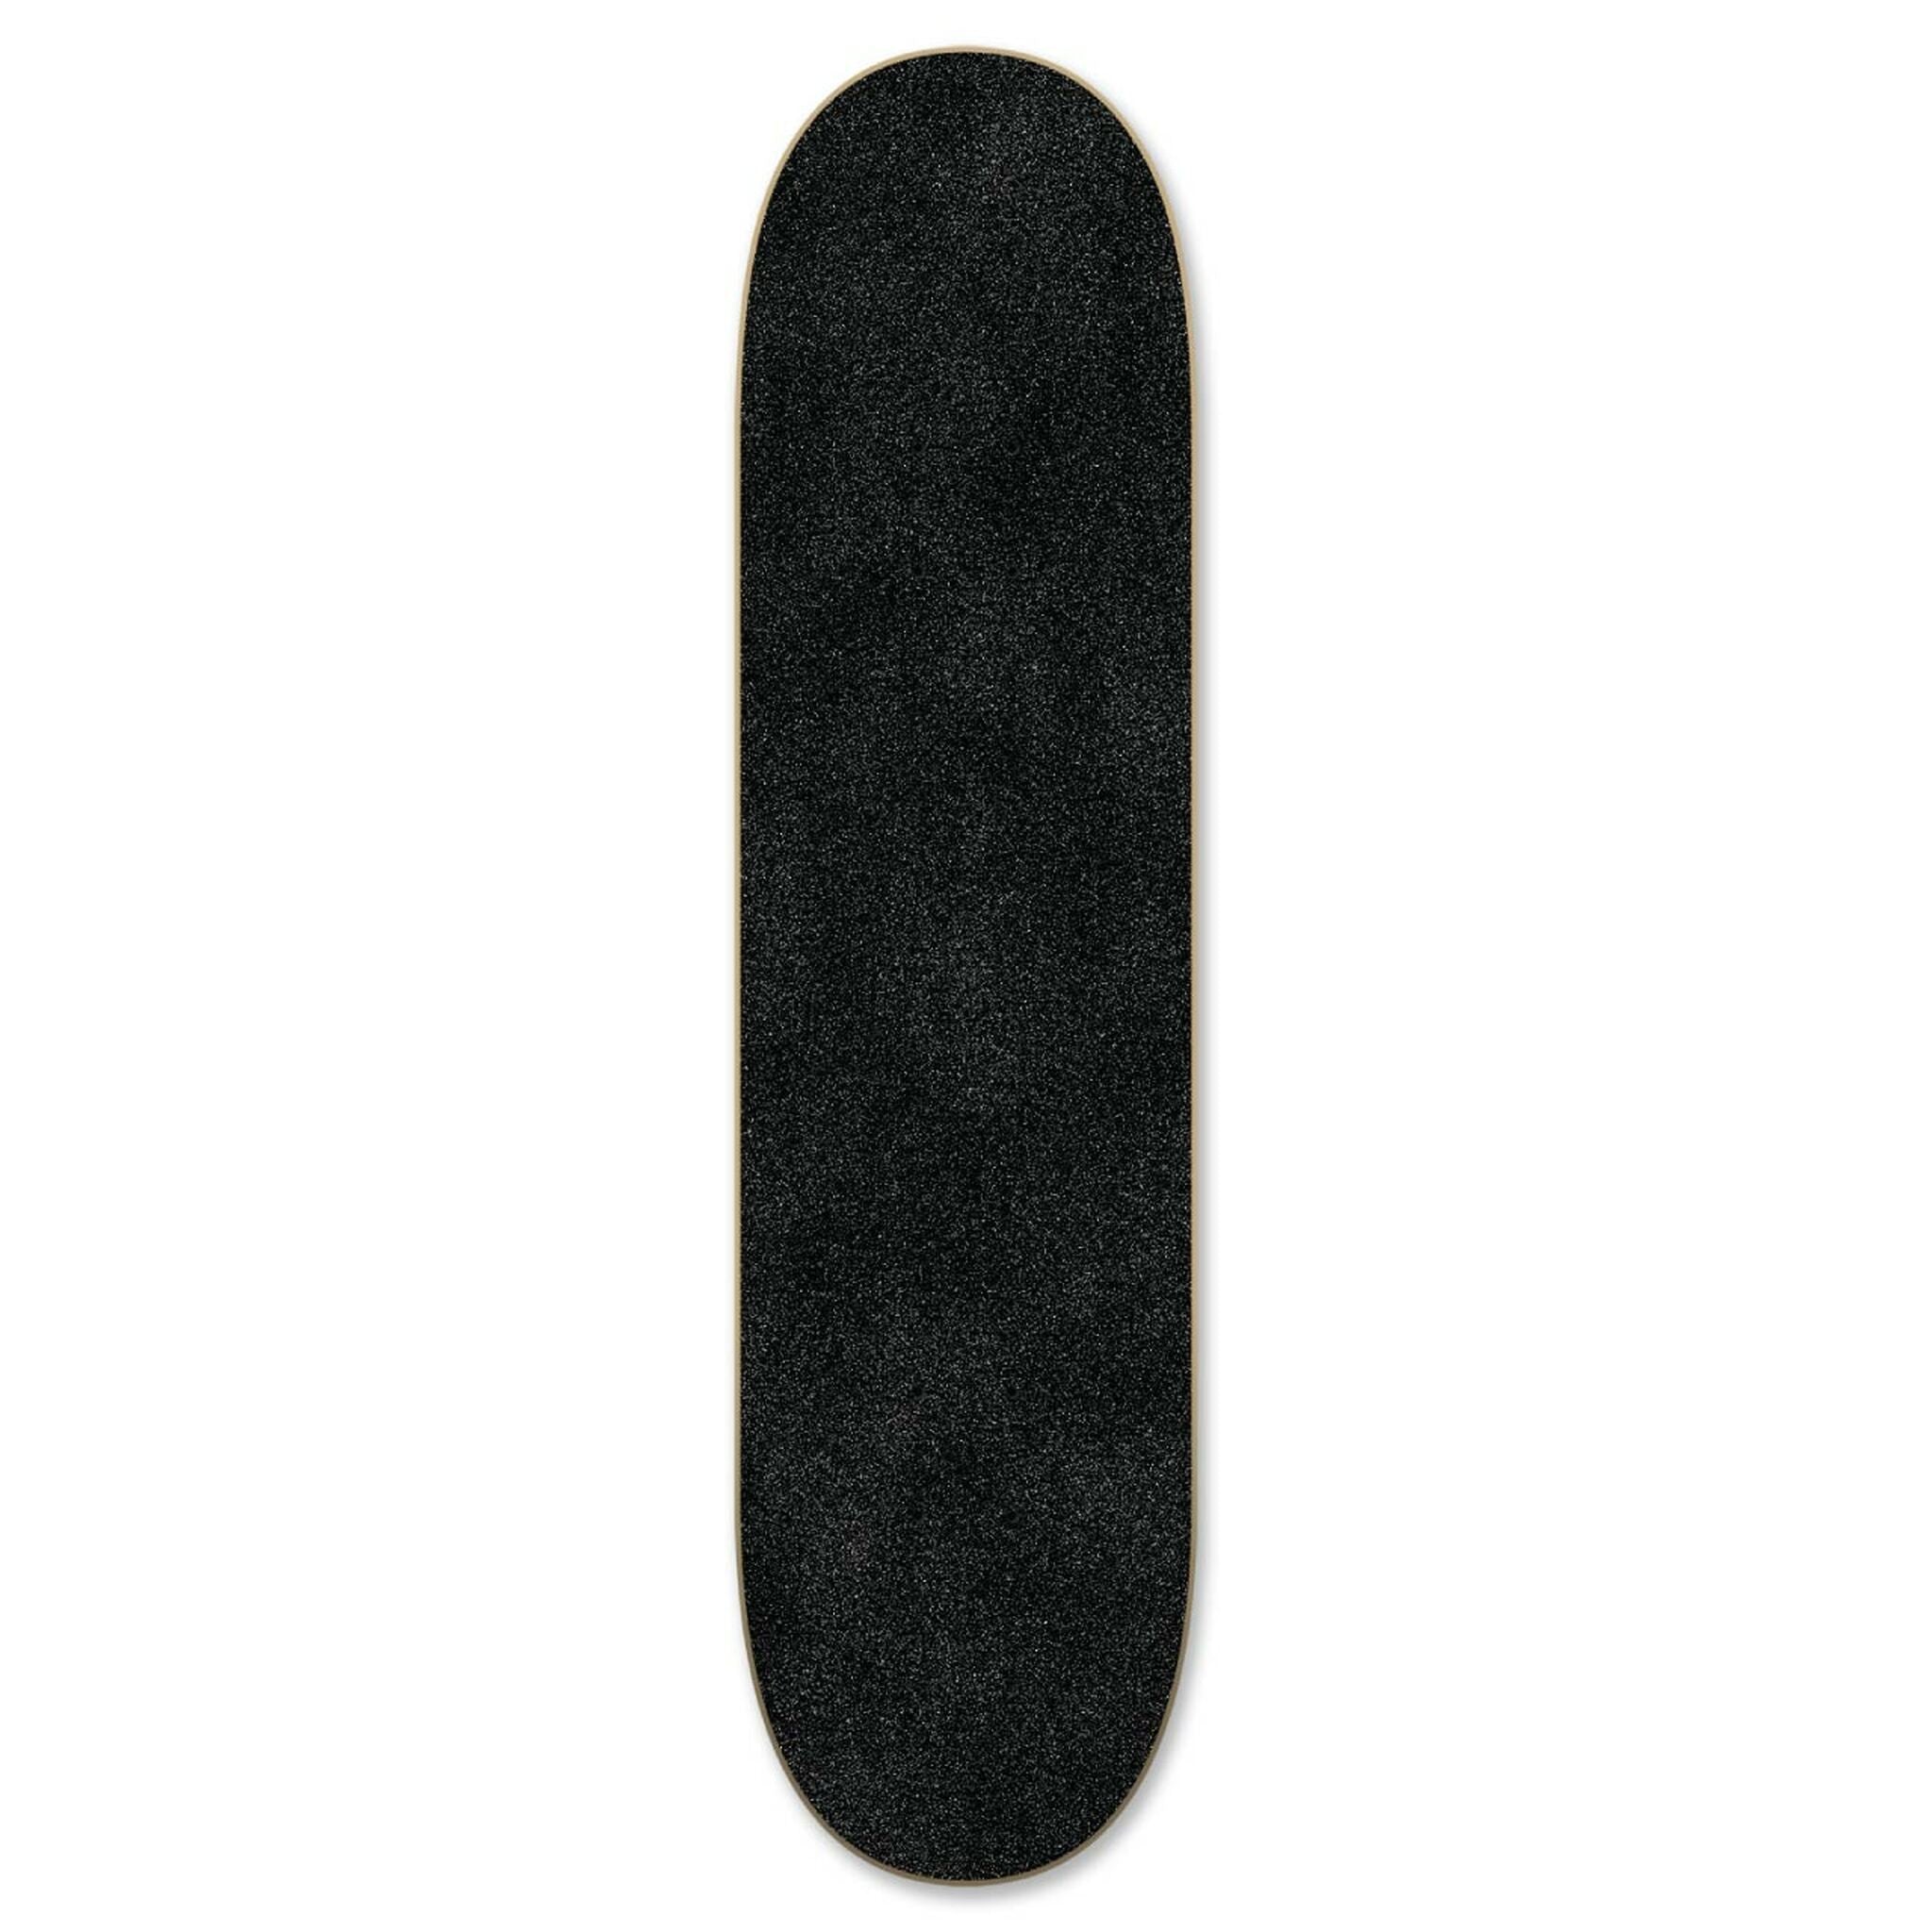 YOCAHER Ace Black - Skateboard Street - Planche Complete